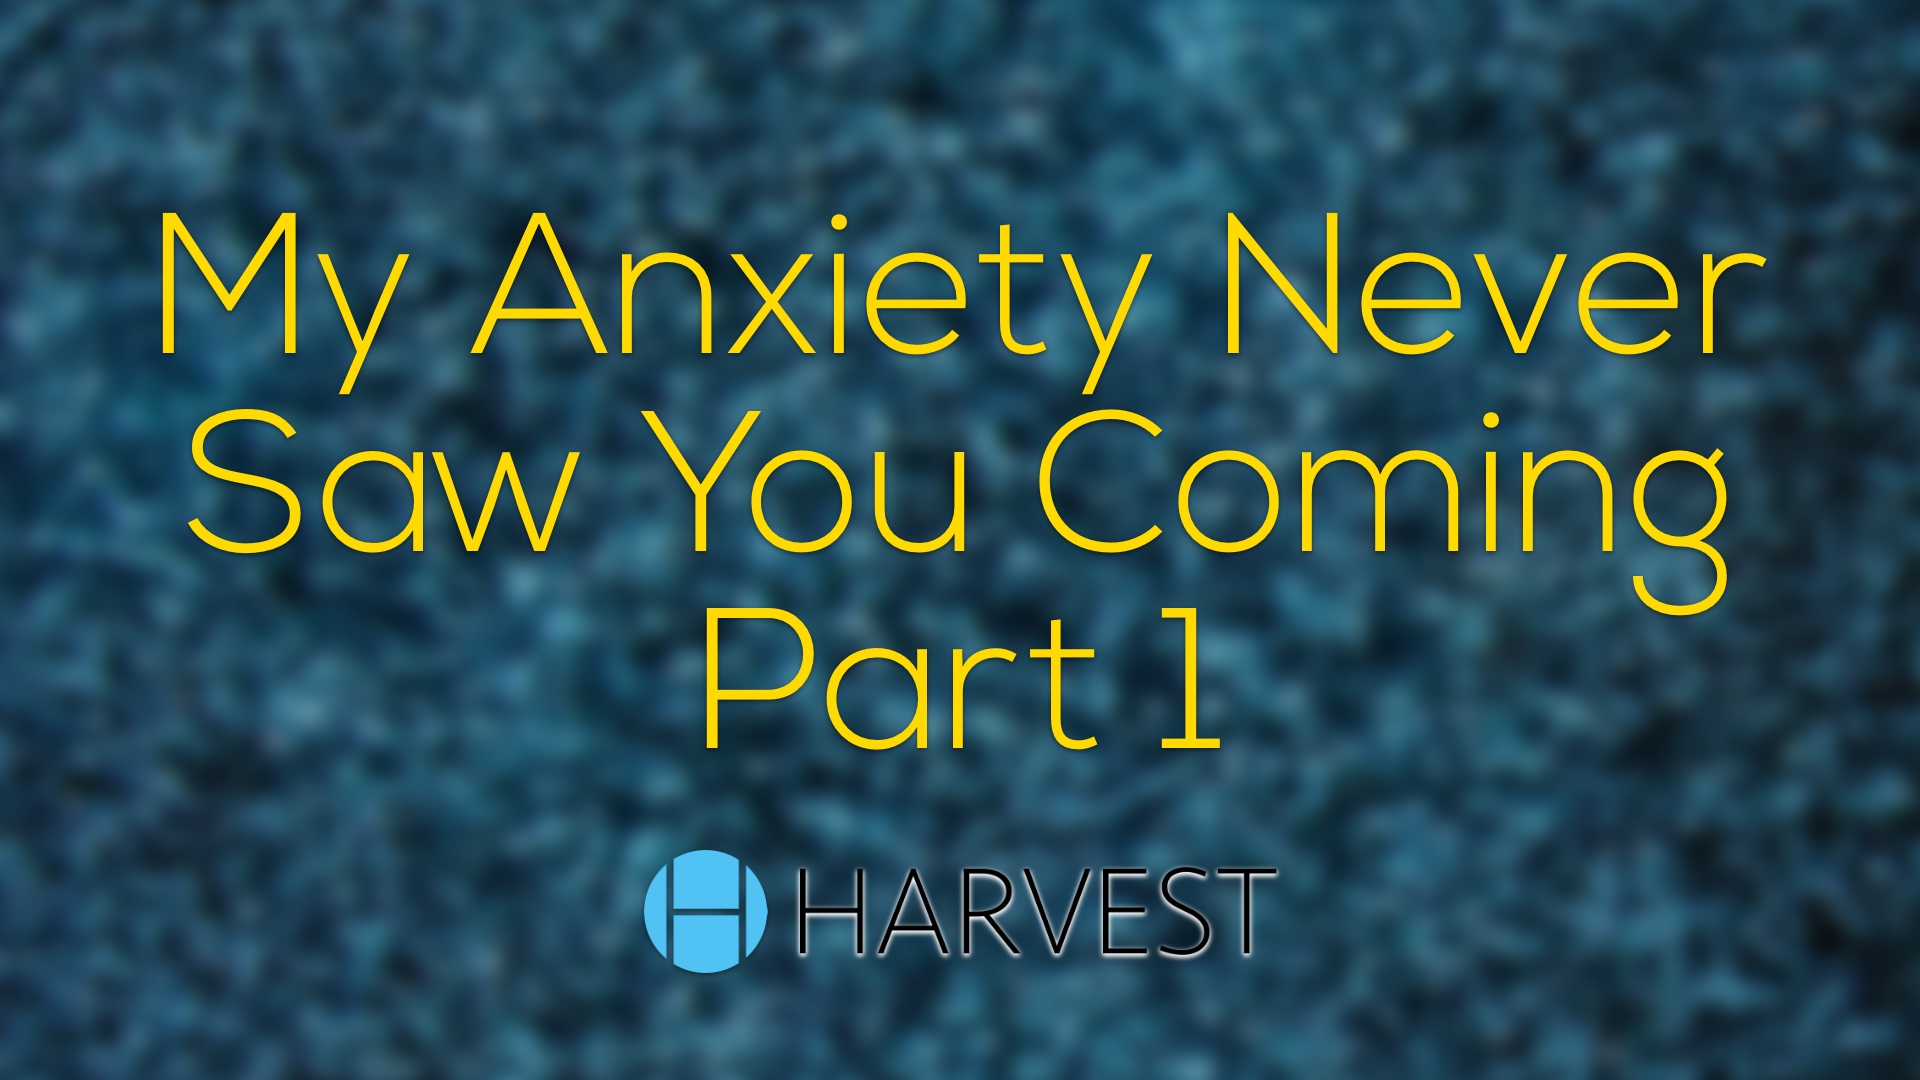 My Anxiety Never Saw You Coming – Part 1